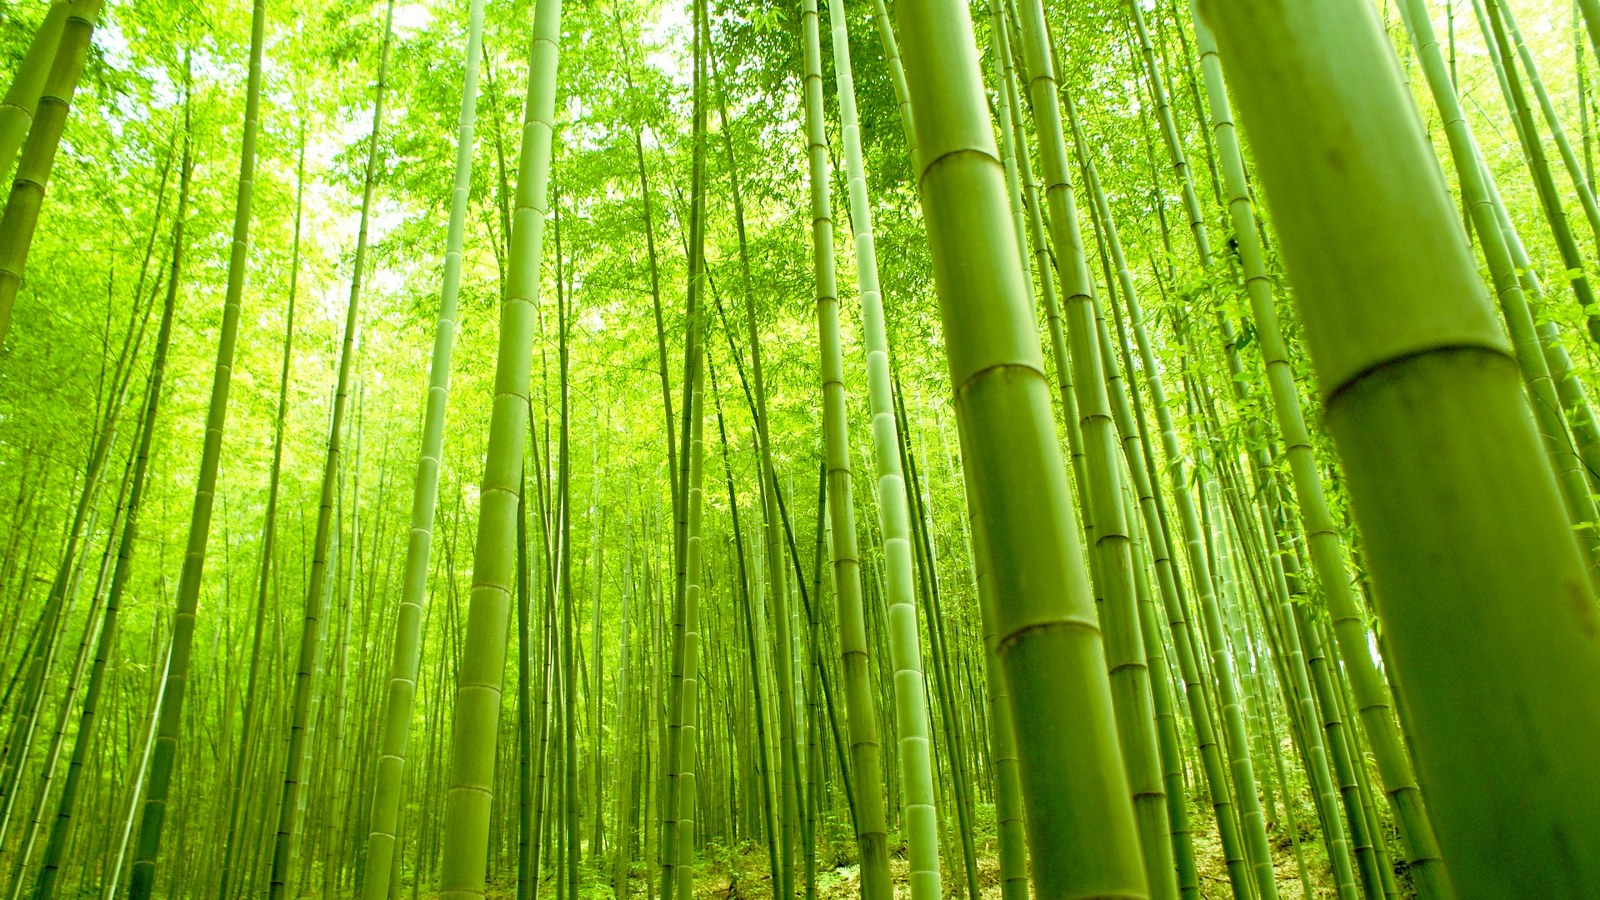 Bamboo In Forest Wallpaper55 Best Wallpaper For Green